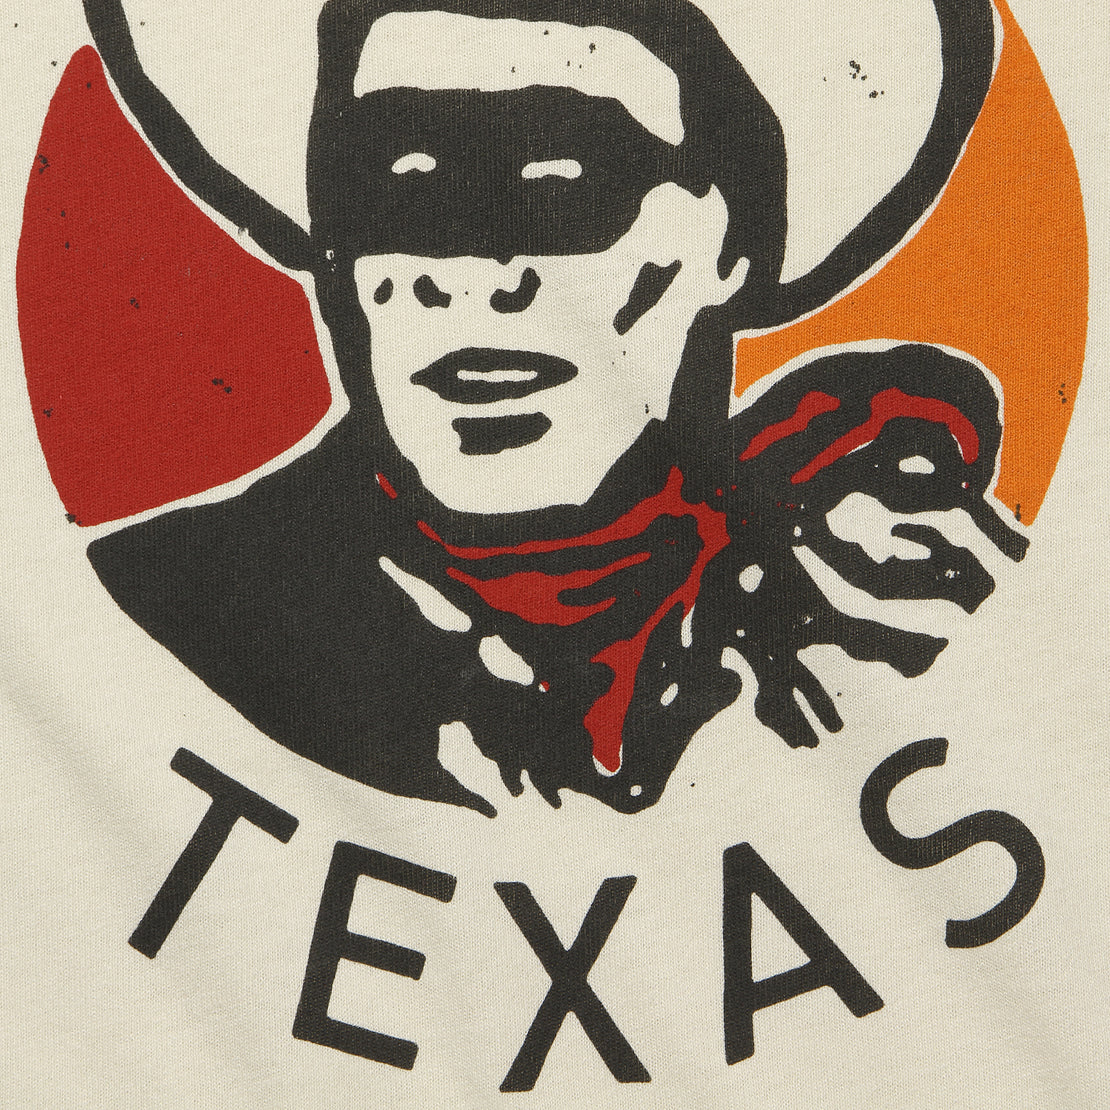 Austin Lone Ranger Tee - Vintage White - Imogene + Willie - STAG Provisions - Tops - S/S Tee - Graphic